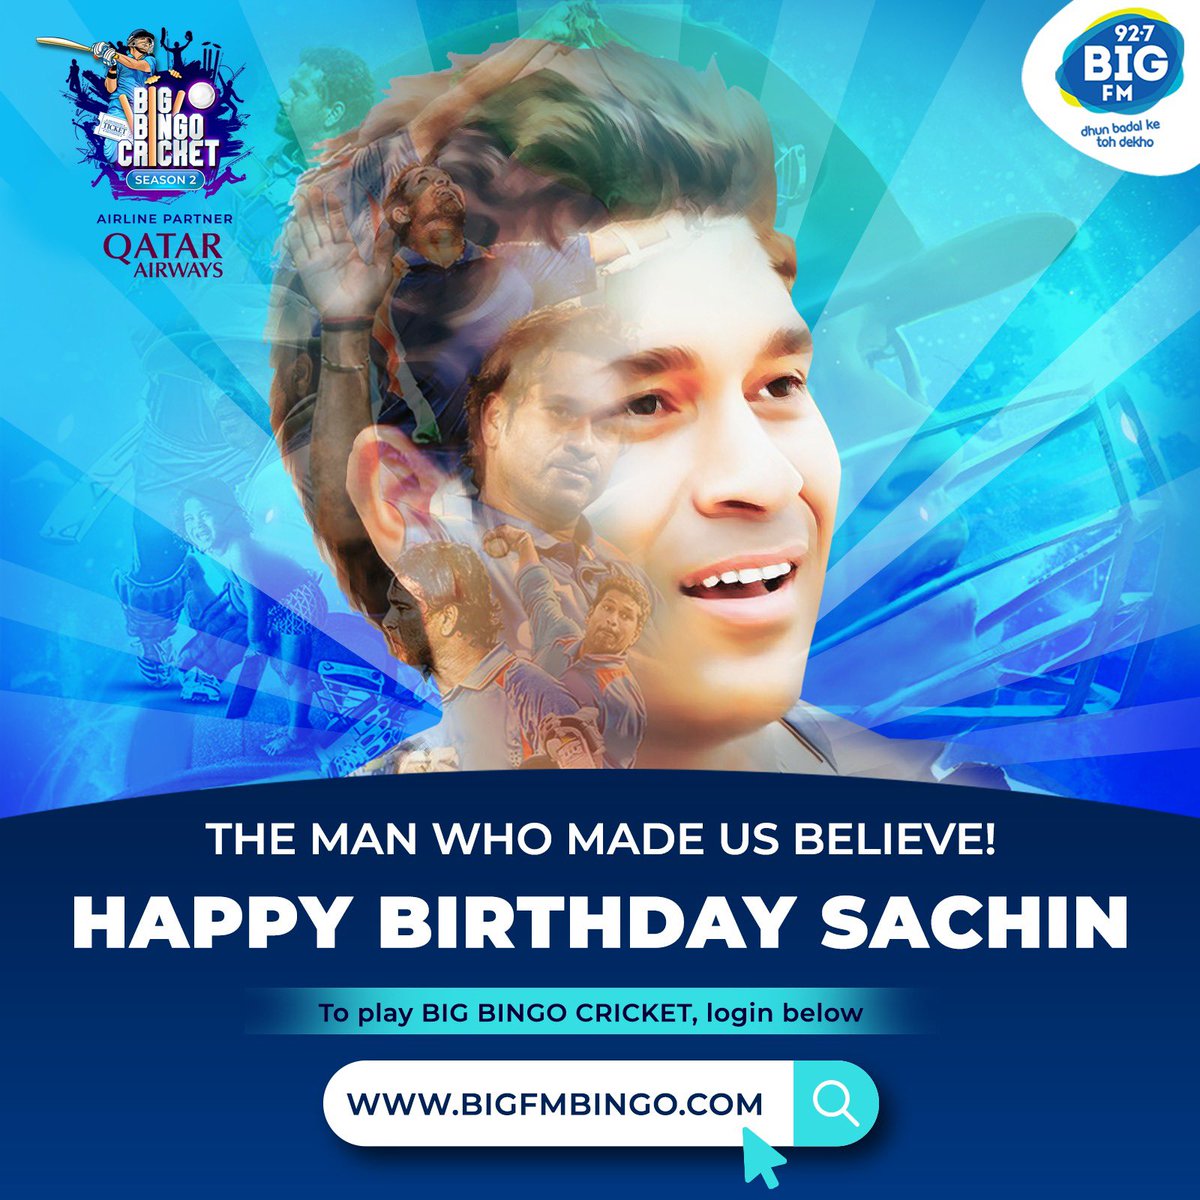 Its the God’s birthday today 🙏 Happy Birthday, Little Master 💙 Do tag @sachin_rt in the comments and send your wishes to him 🙌 Log on to bigfmbingo.com to start playing NOW 🏏 Airline Partner: @qatarairways #BIGFM #DhunBadalKeTohDekho #BIGBingoCricket #Season2…